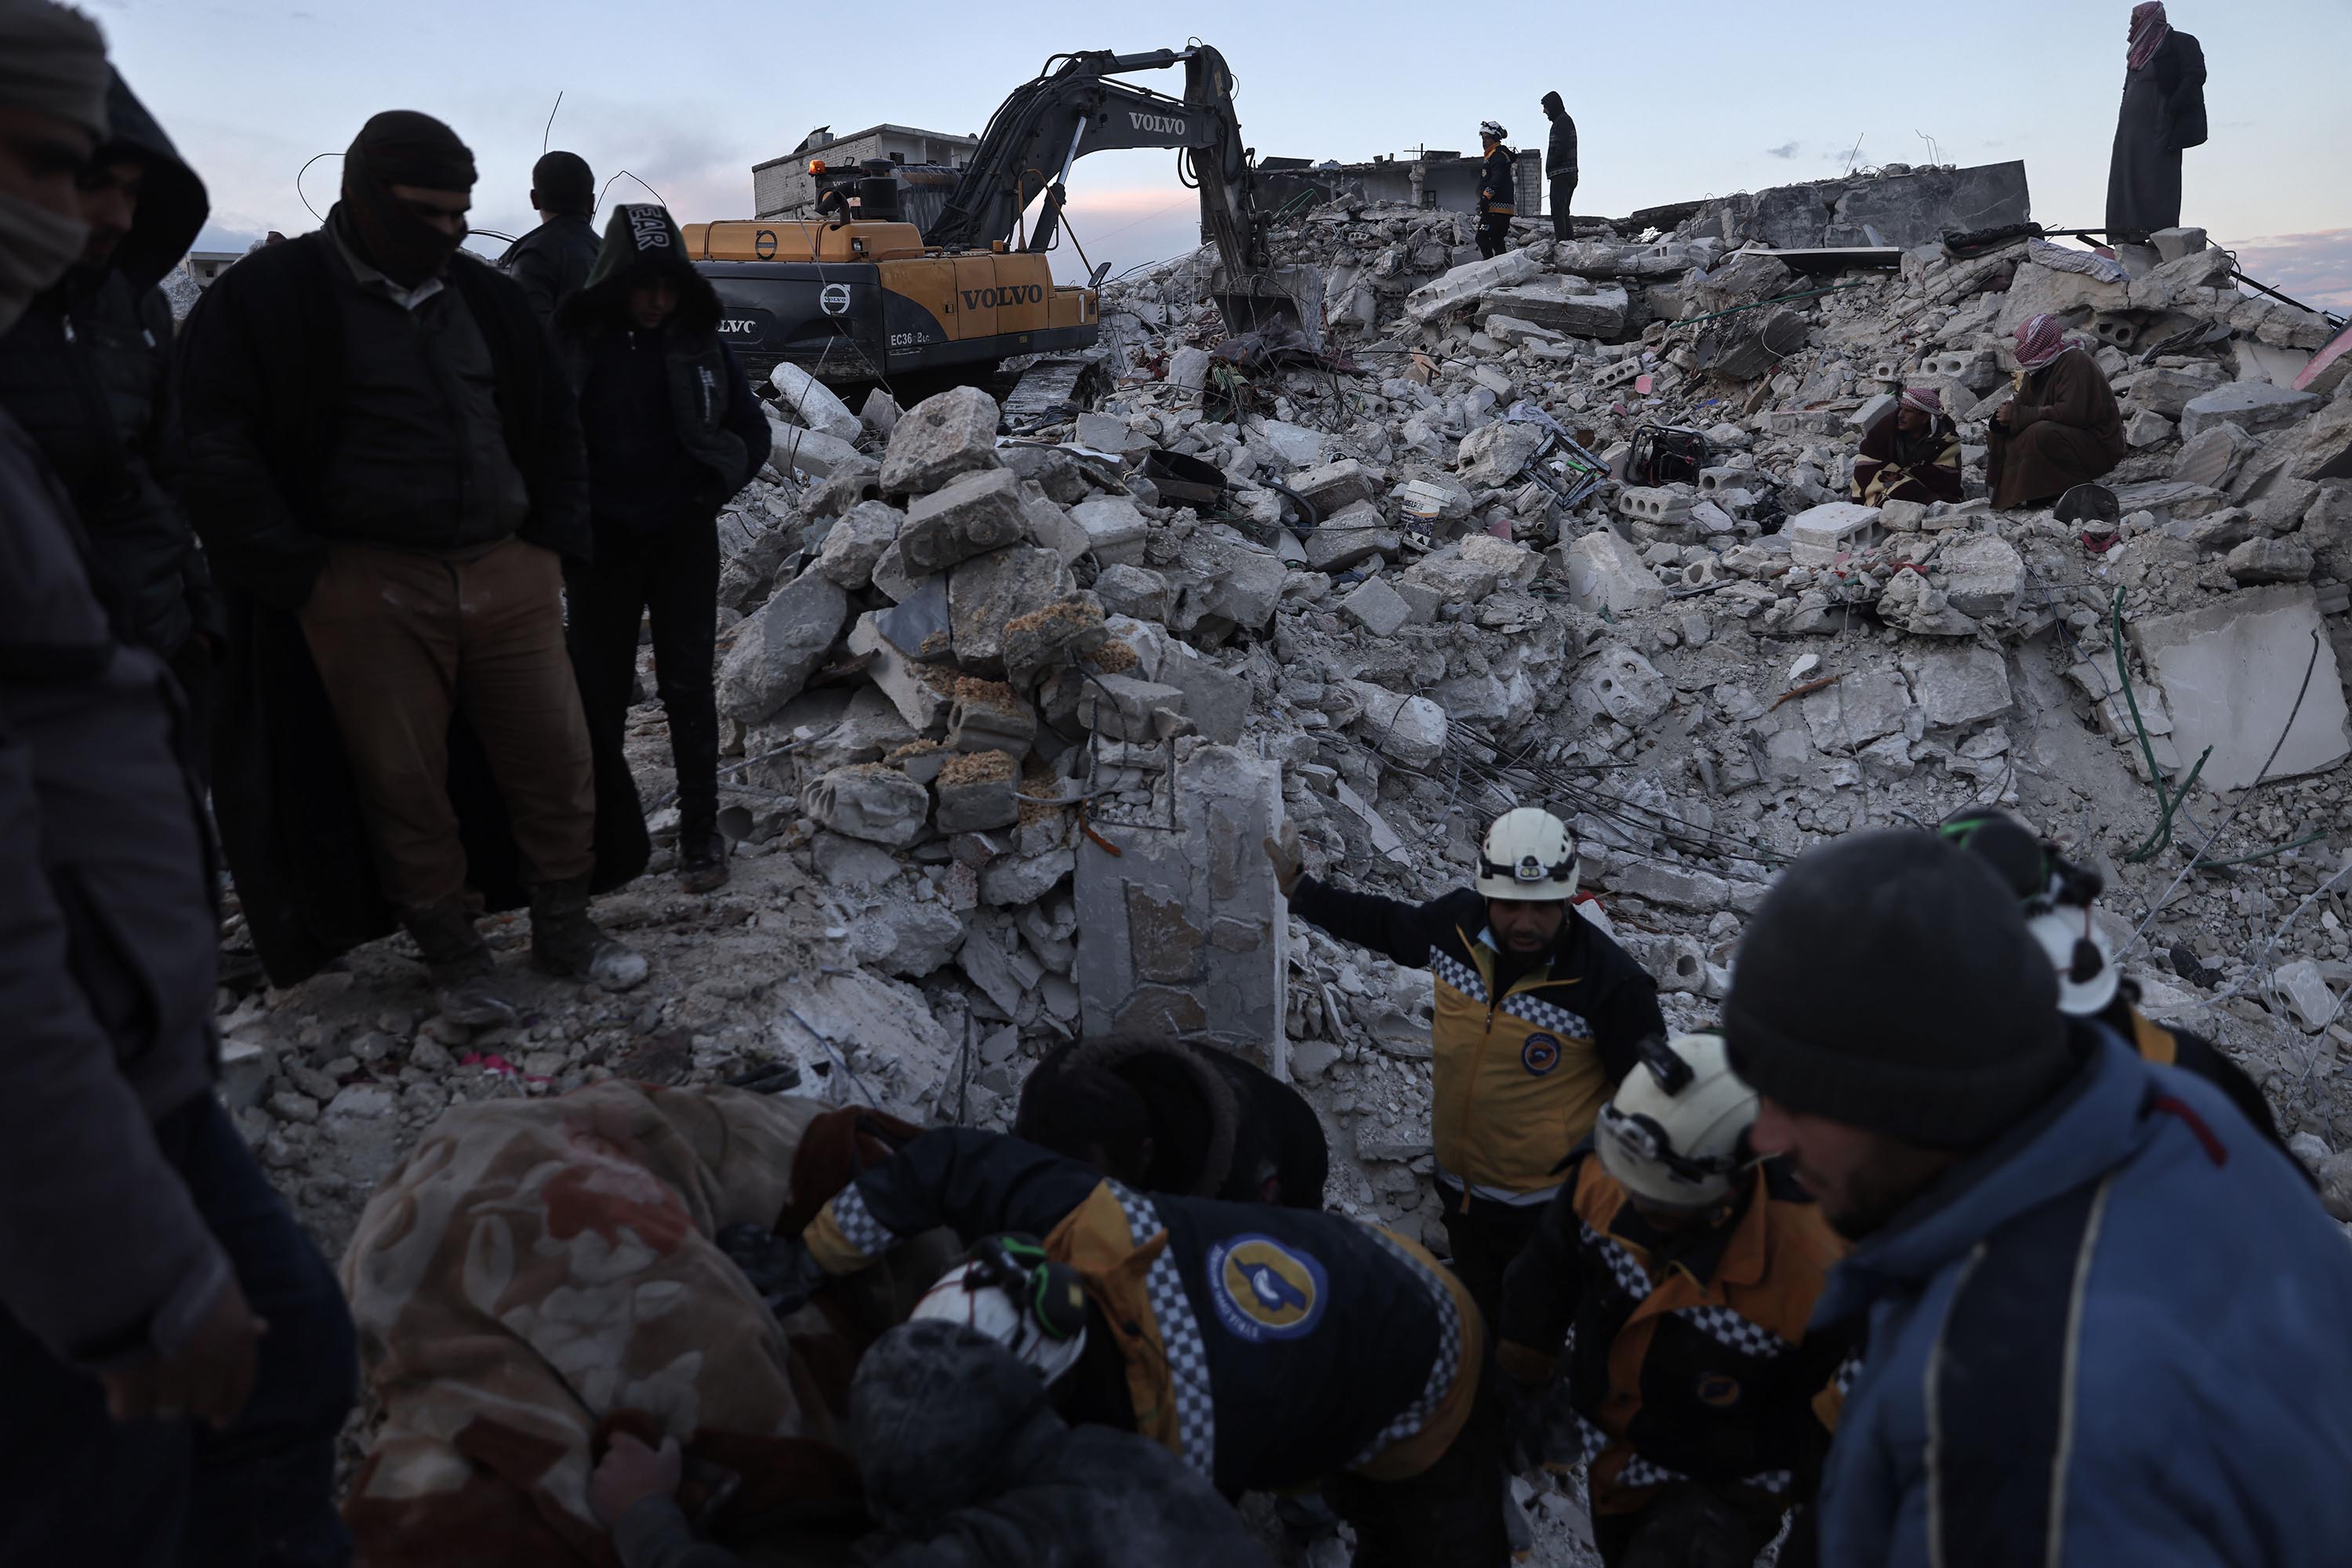 Civilians and members of the "White Helmets" work to save people trapped beneath a destroyed building in Harem, Syria, on Tuesday, February 7. 